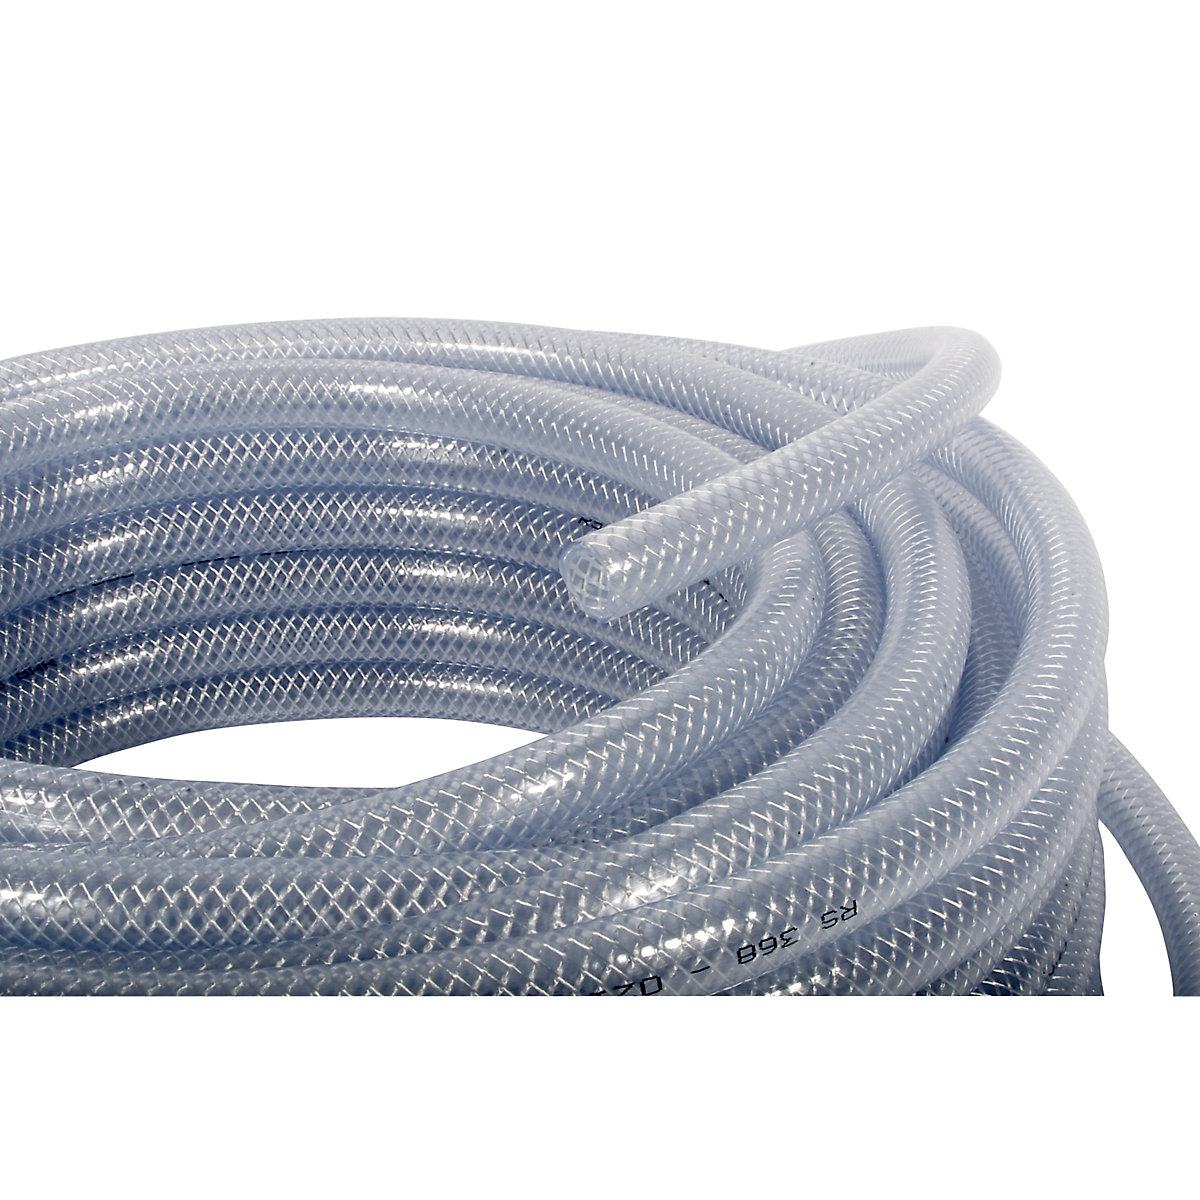 Water hose made of PVC, clear – COBA: length 50 m